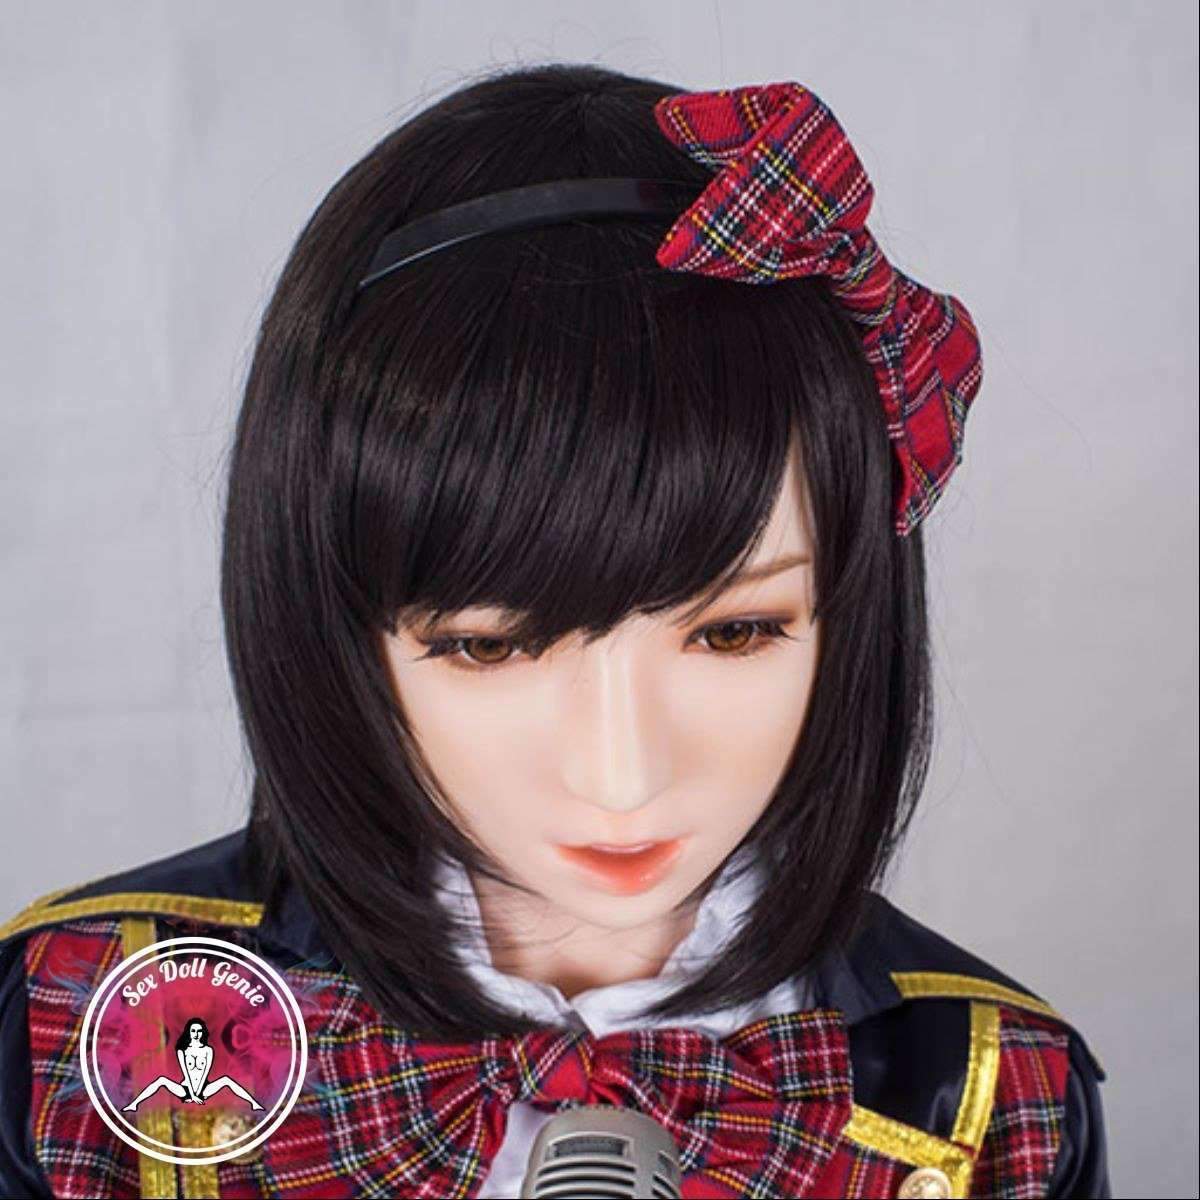 DS Doll - 163Plus - Kathy Head - Type 3 D Cup Silicone Doll-6